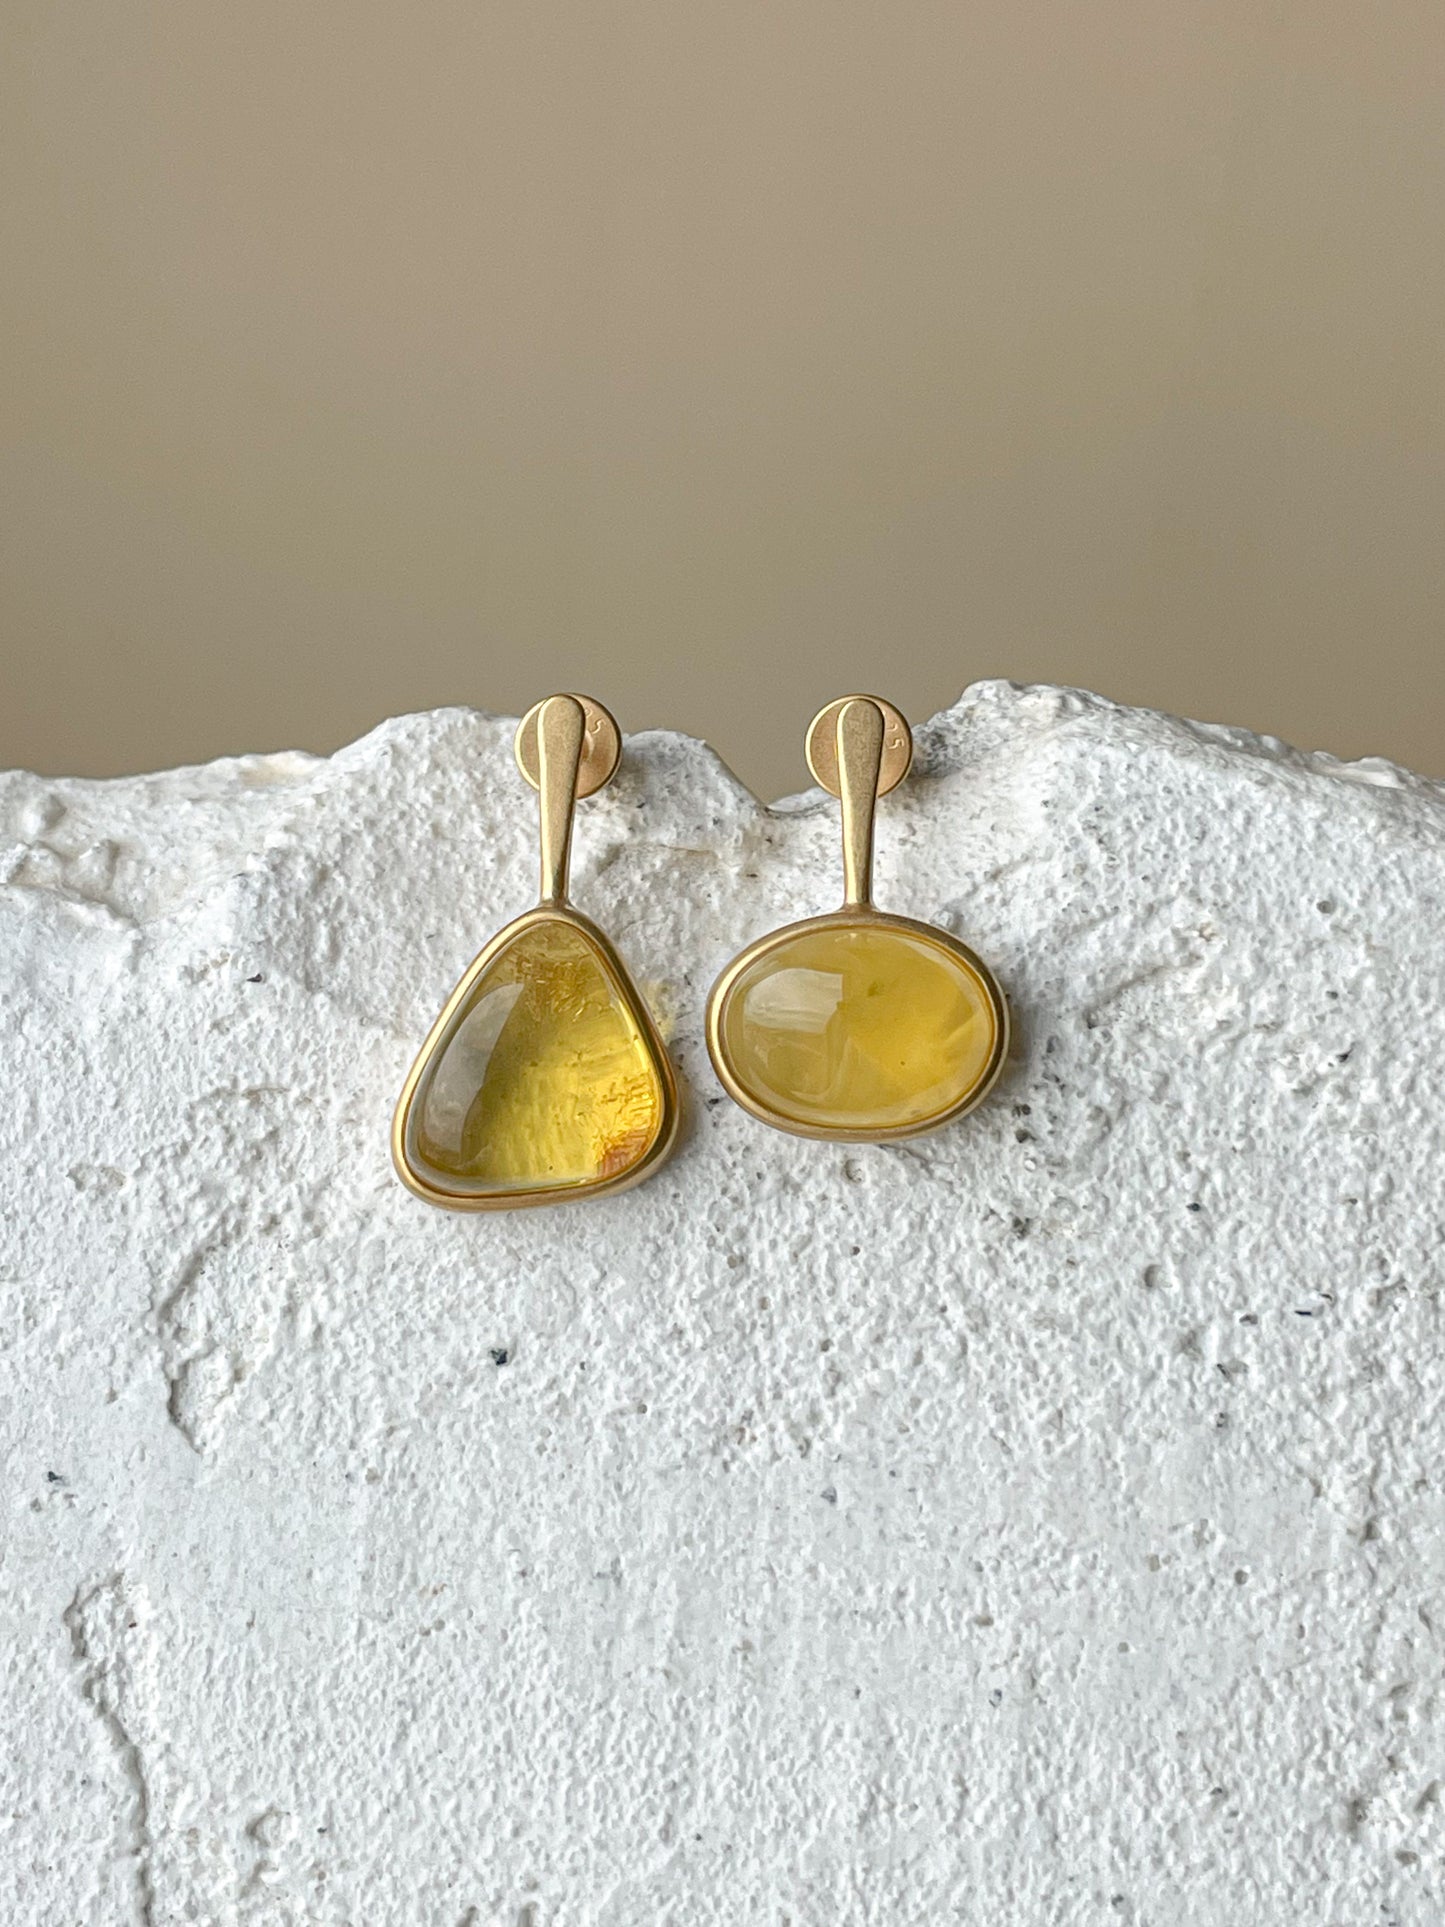 Honey amber stud earrings - Gold plated silver - Mismatched earrings collection